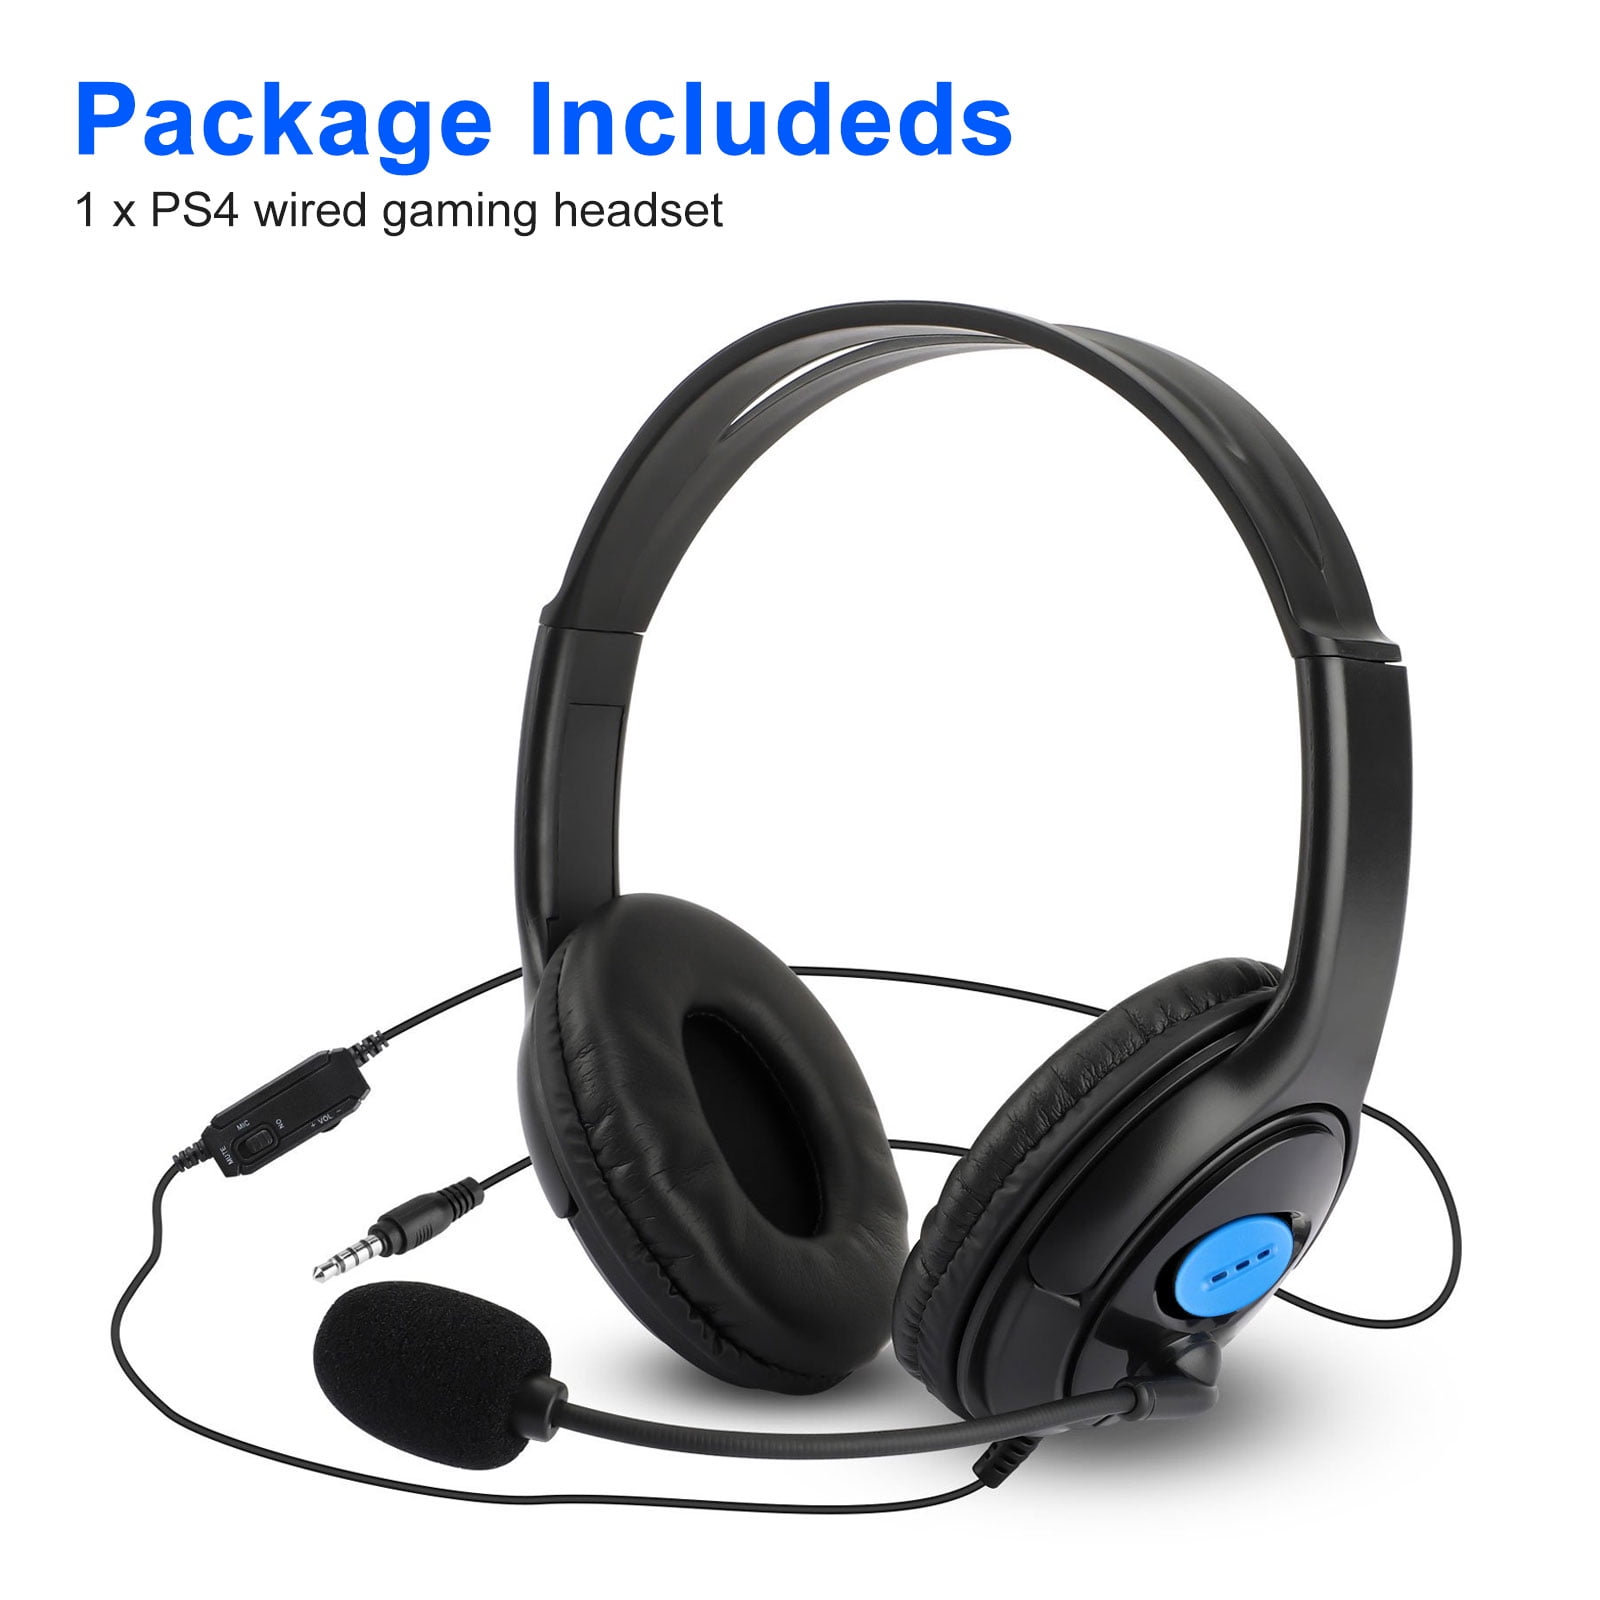 Bass Surround LETTON Stereo Gaming Headset for Xbox One Volume Controller Soft Memory Earmuffs for Computer Laptop Mac PC Over Ear Headphones with Noise Cancelling Mic PS4 